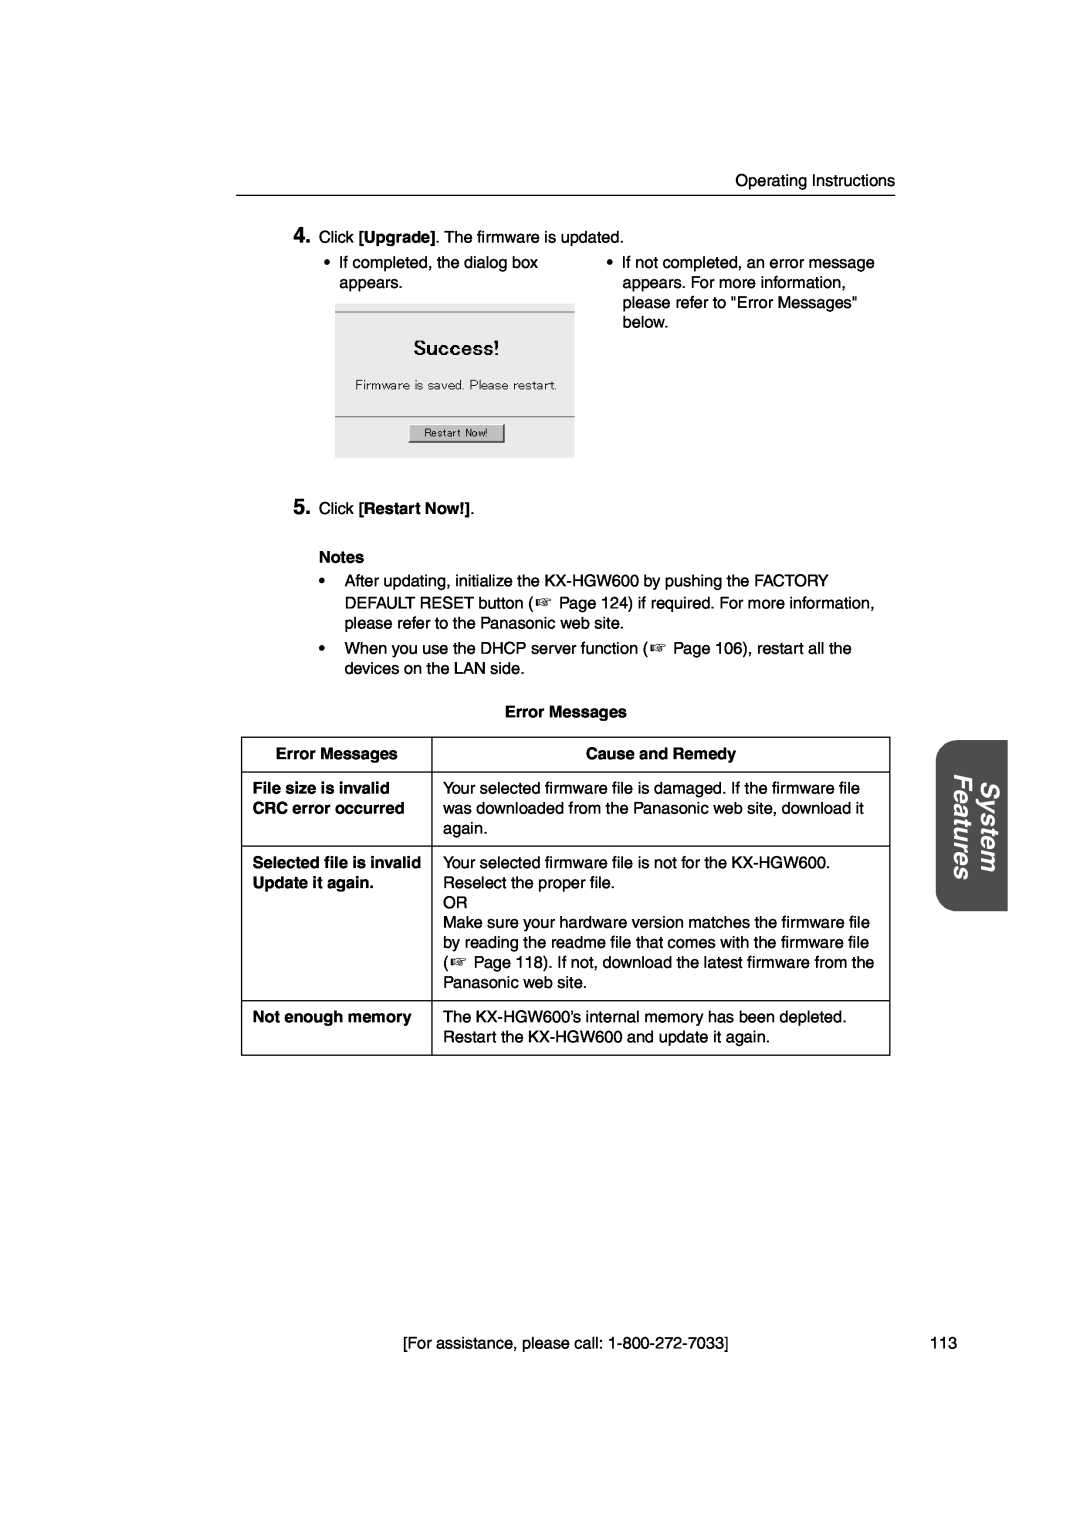 Panasonic KX-HGW600 manual Features, System, If not completed, an error message 